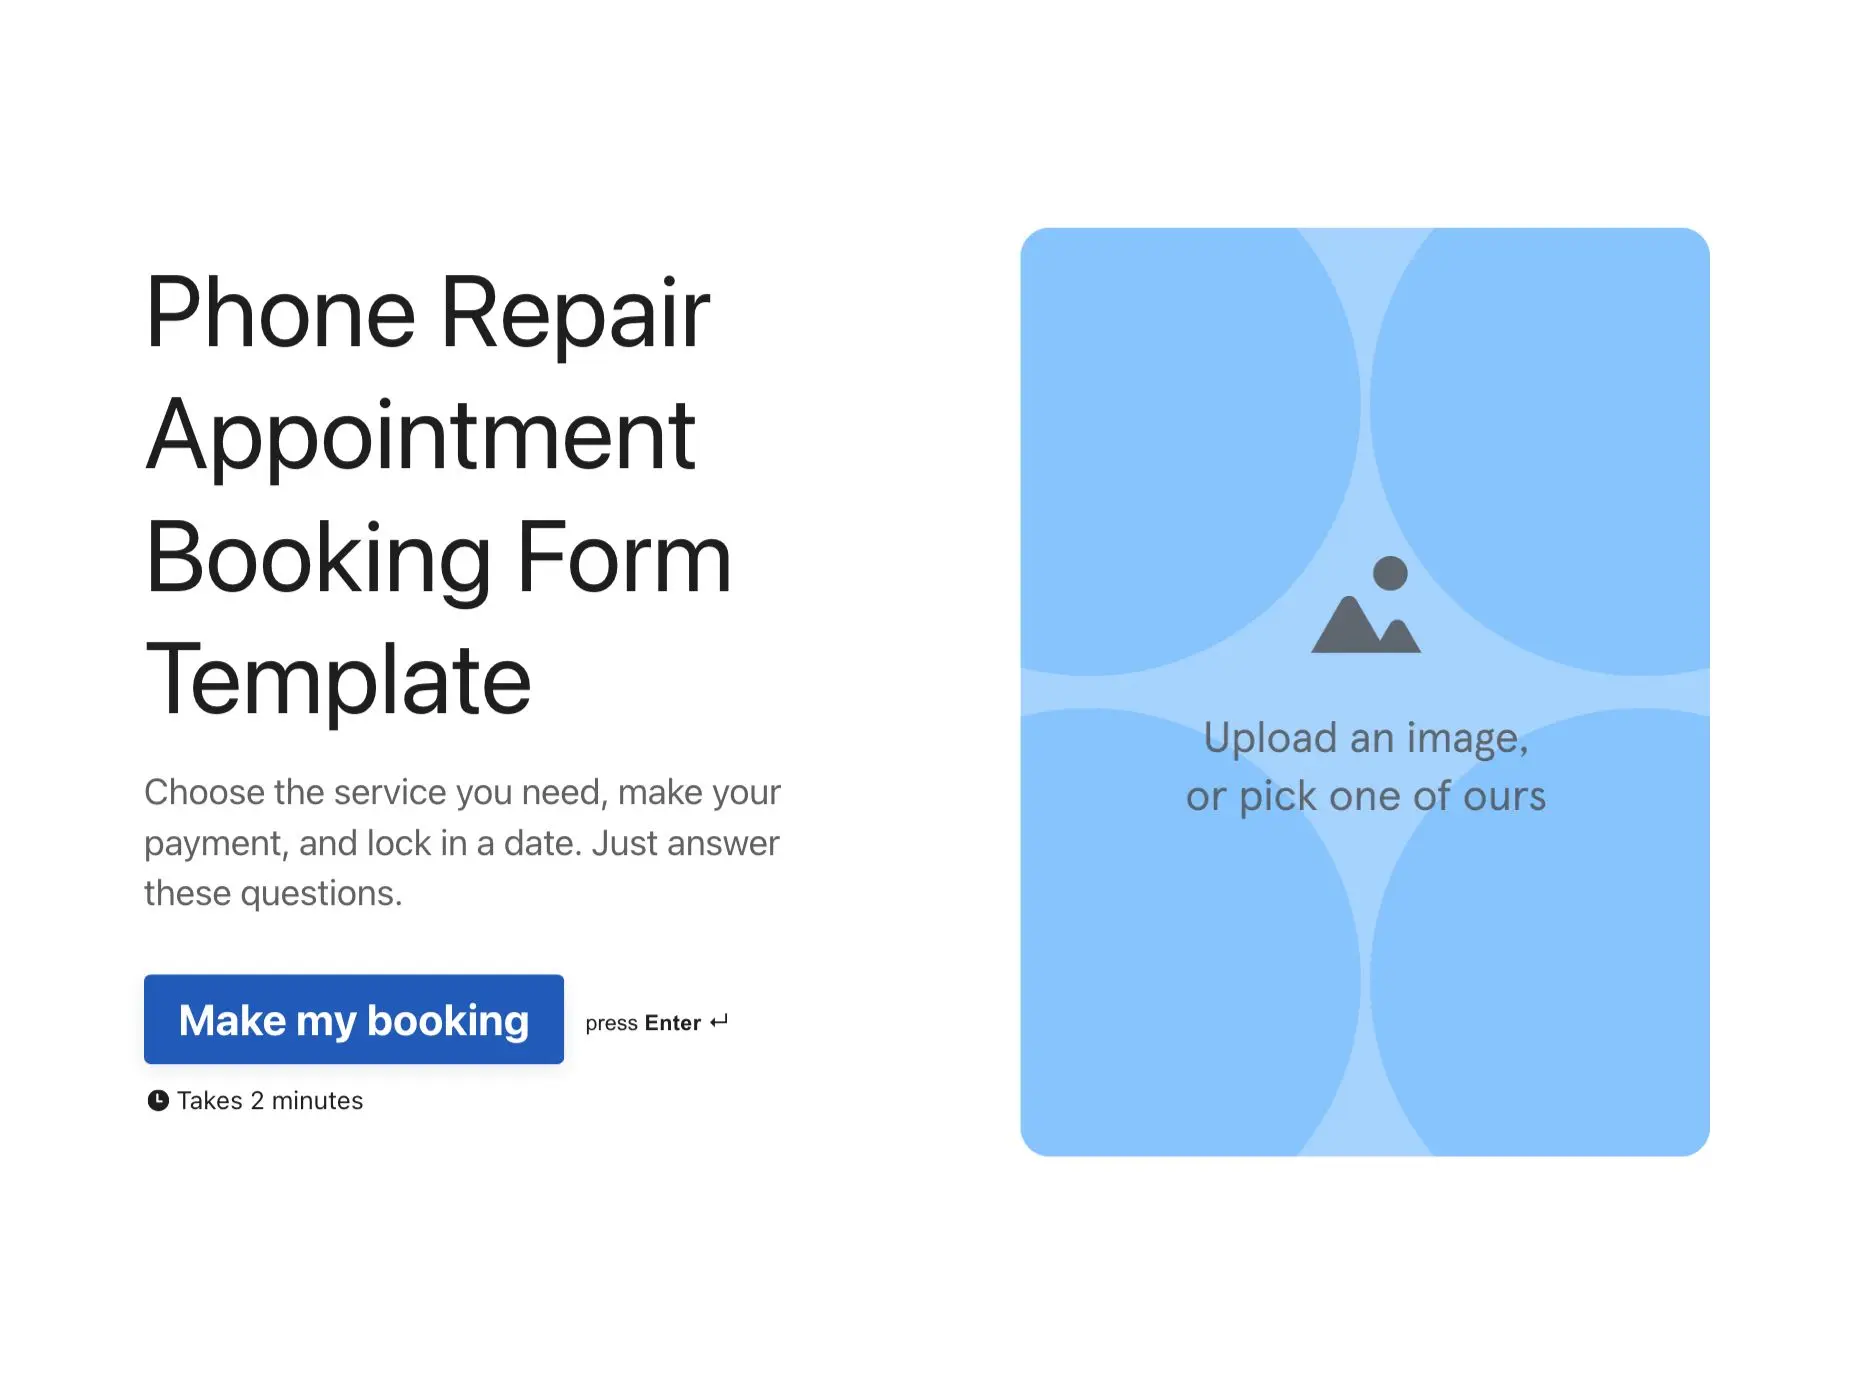 Phone Repair Appointment Booking Form Template Hero